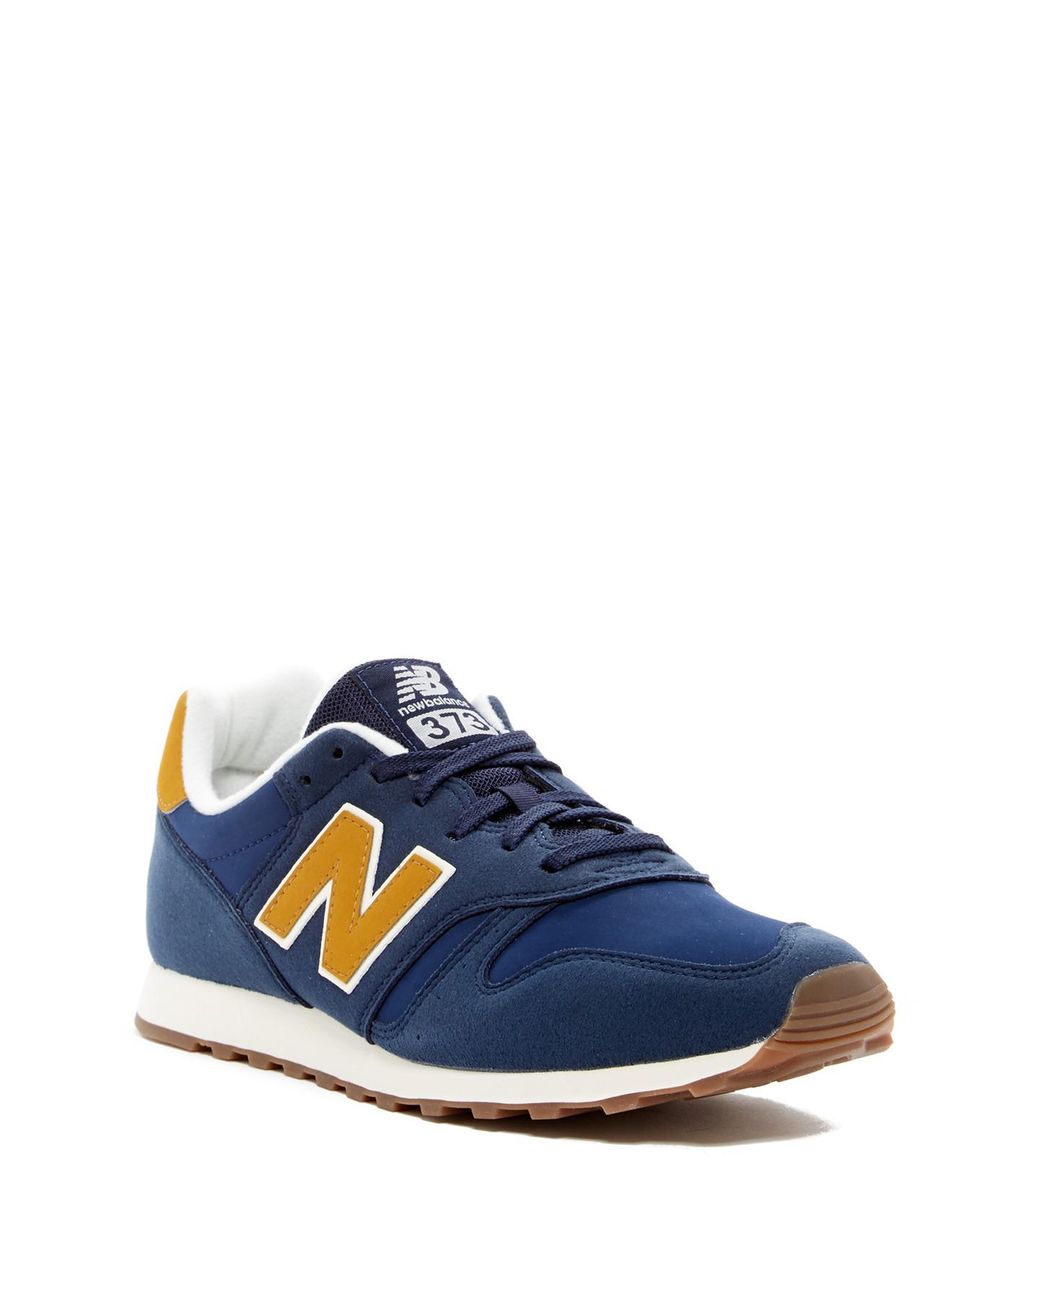 New Balance Ml373 Classic Sneaker - Wide Width Available in Blue-Yellow  (Blue) for Men | Lyst